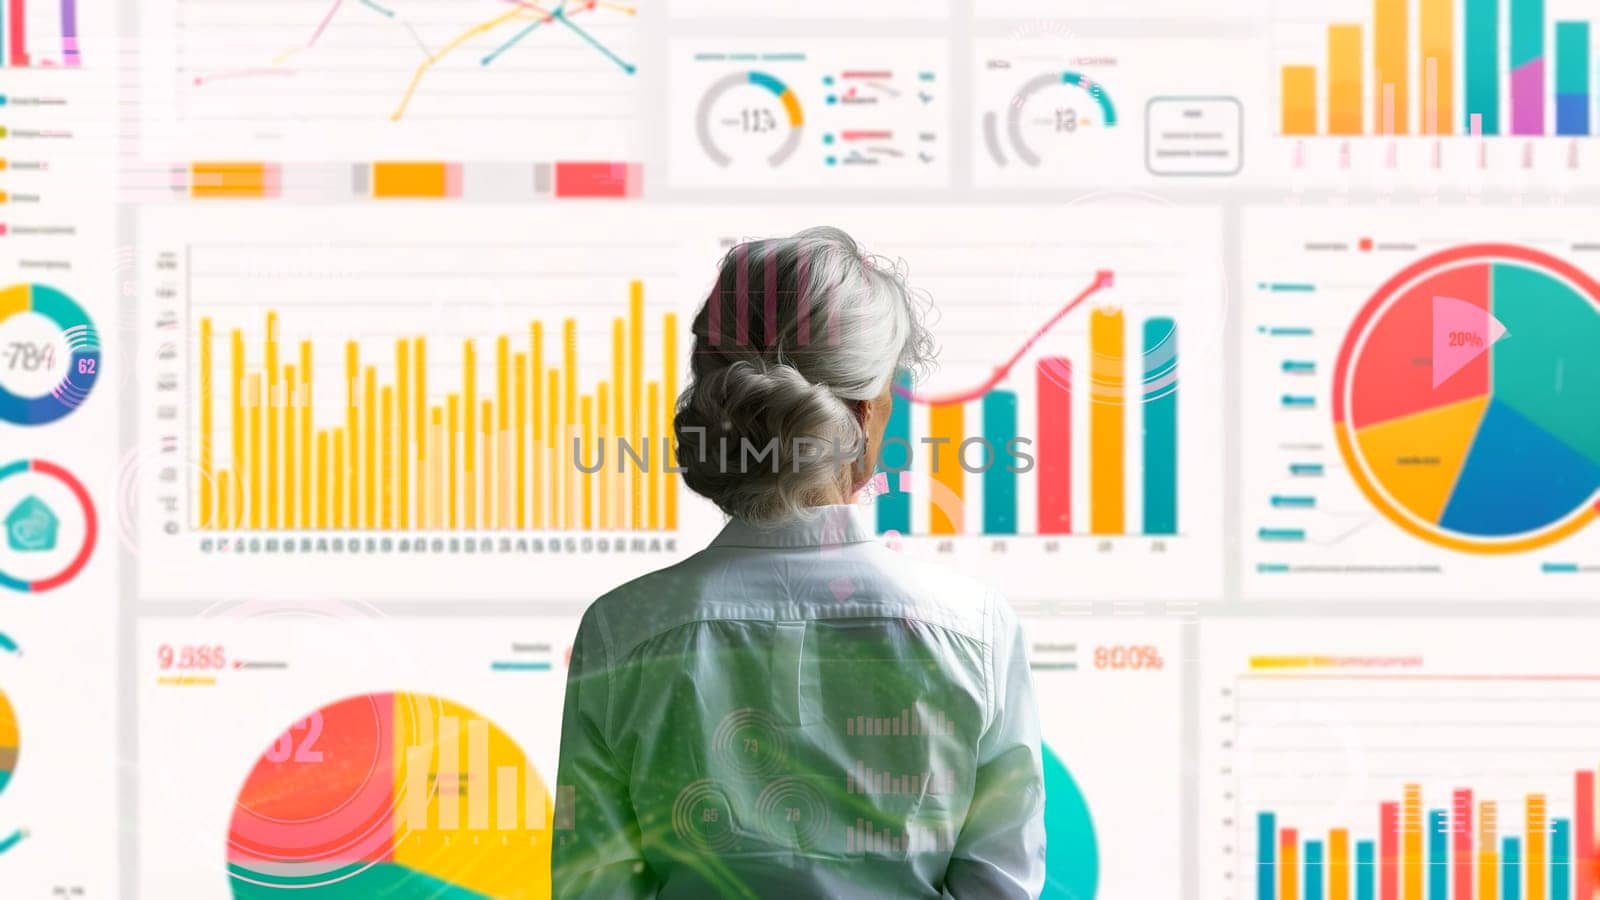 Financial advisor expert or trader working with BI business intelligence data chart and graph dashboard making decision for marketing strategy research for success of future LISP business planning.